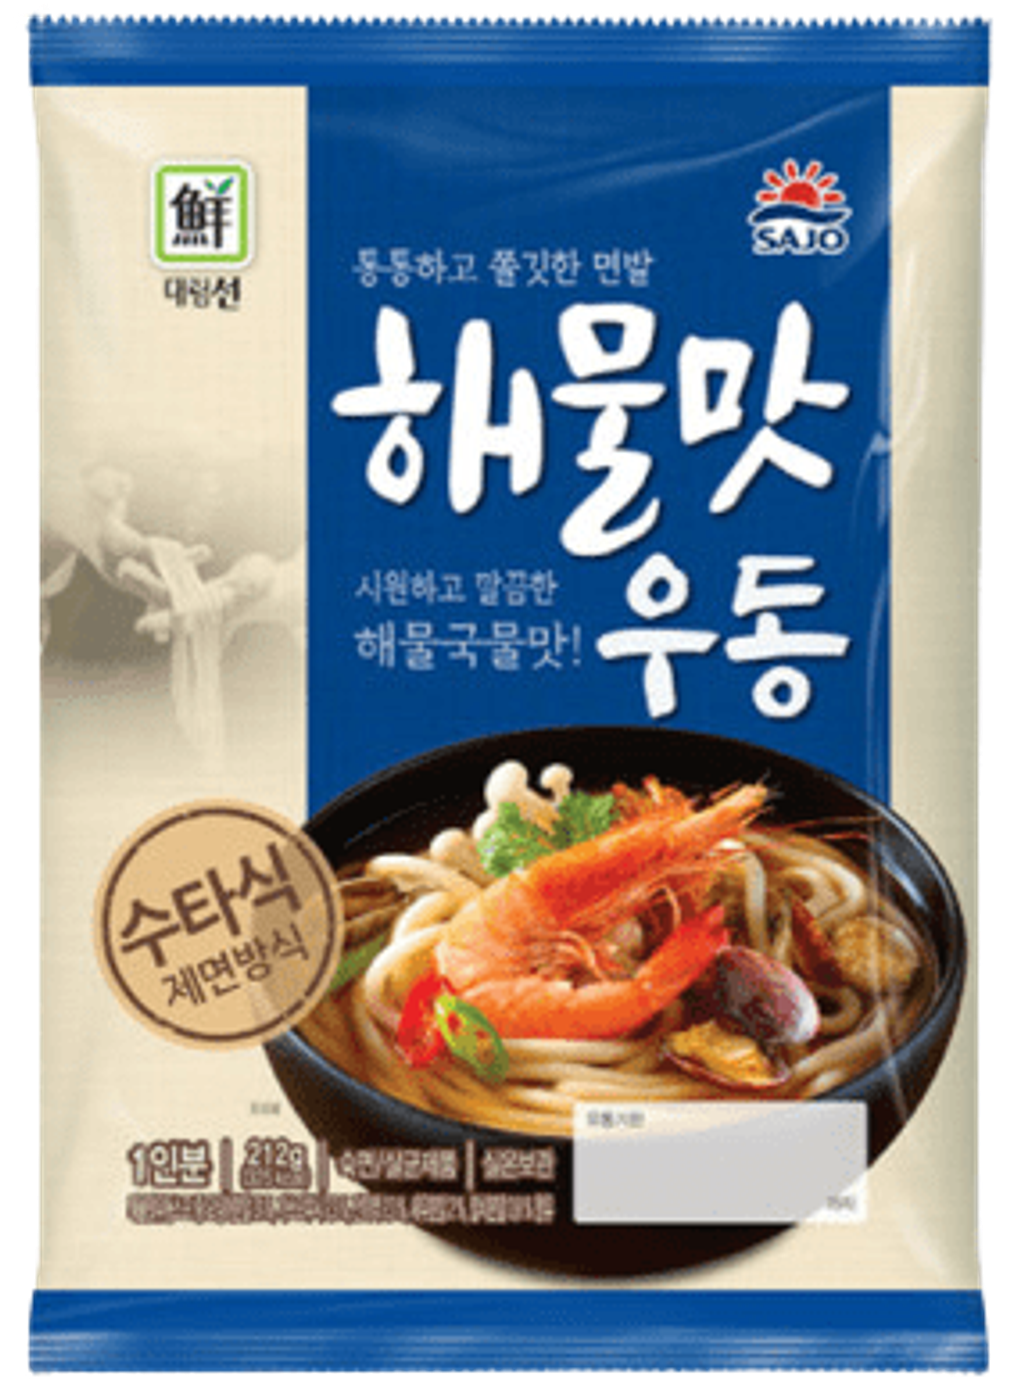 seafood-udon-removebg-preview.png